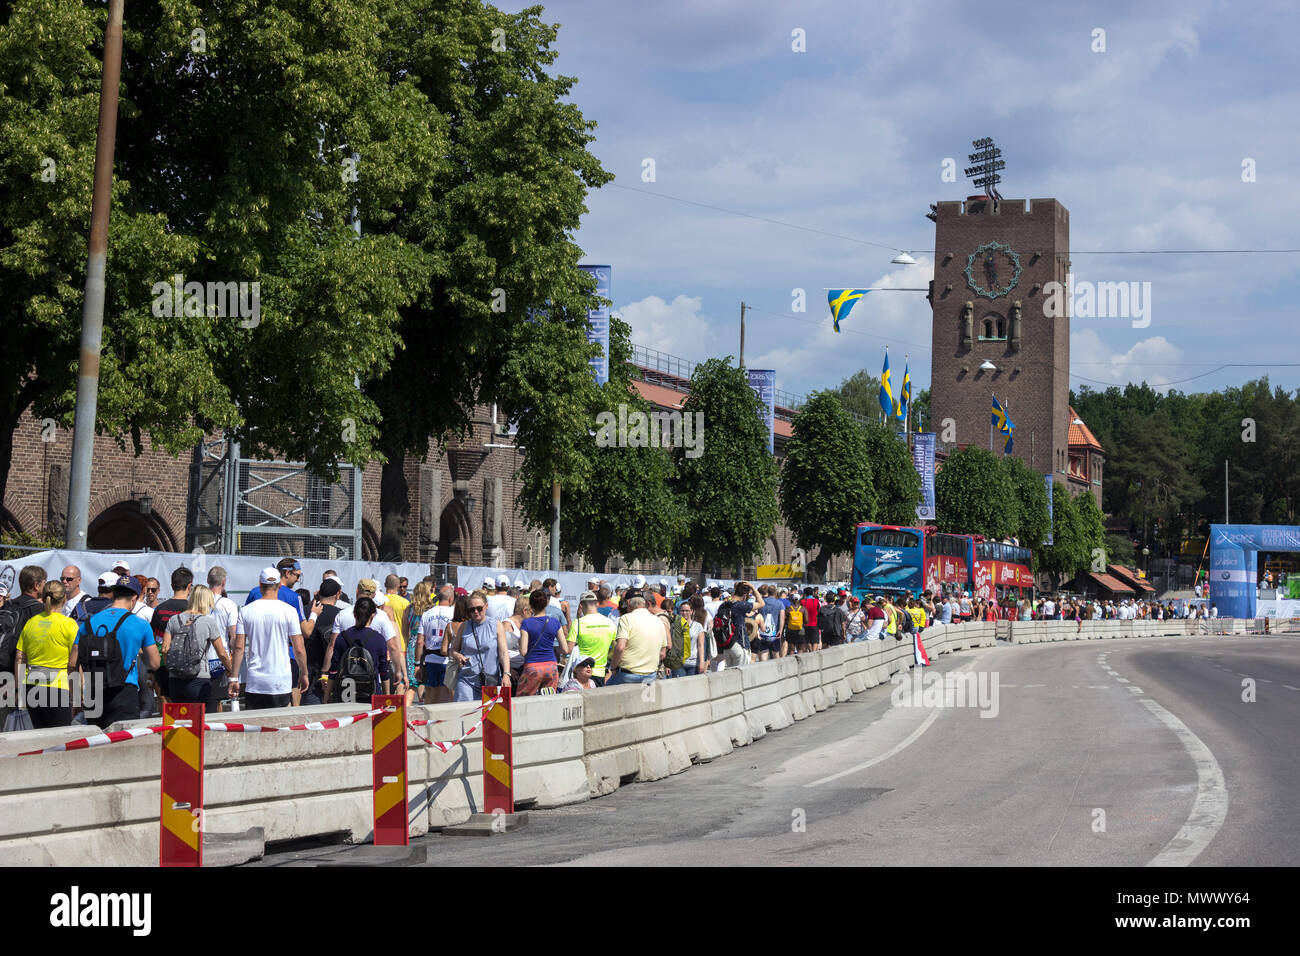 ASICS Stockholm (STHLM) Marathon 2018. Wide angle view of the crowded streets with queuing up participants, at the starting point area, outside of the classical architecture of the Stadion (stadium) building, where the marathon is taking place. The Stadion (stadium) was specially built to host the Olympic Games in 1912.  Stockholm, Sweden. 2nd June 2018. Credit: BasilT/Alamy Live News Stock Photo